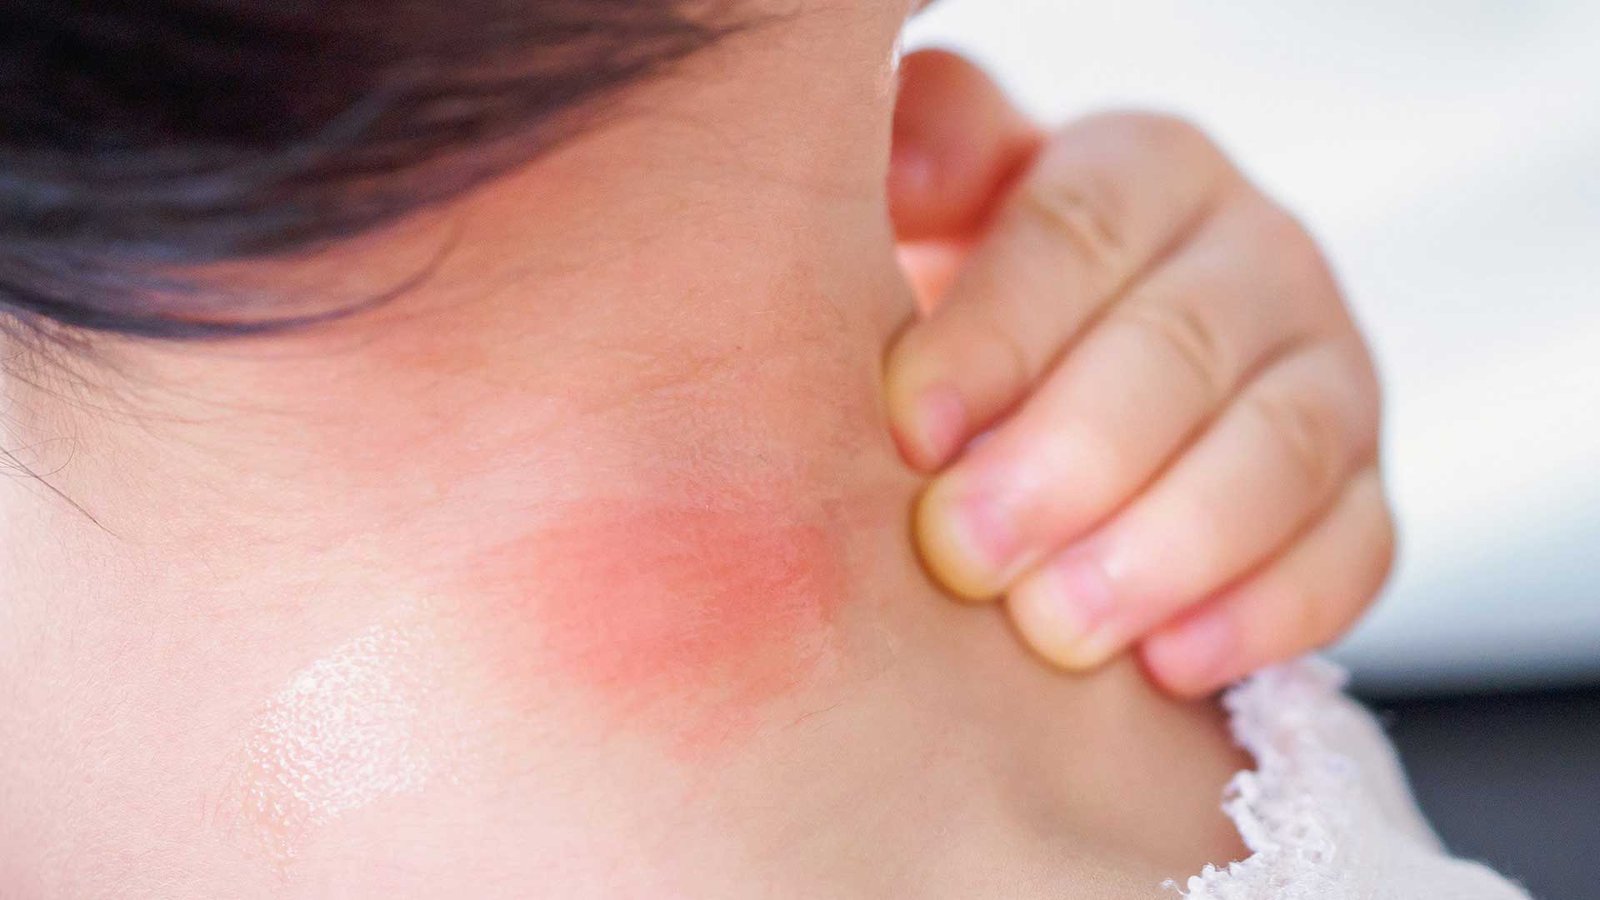 The Ways You Can Get Rid Of Mosquito Bite Marks